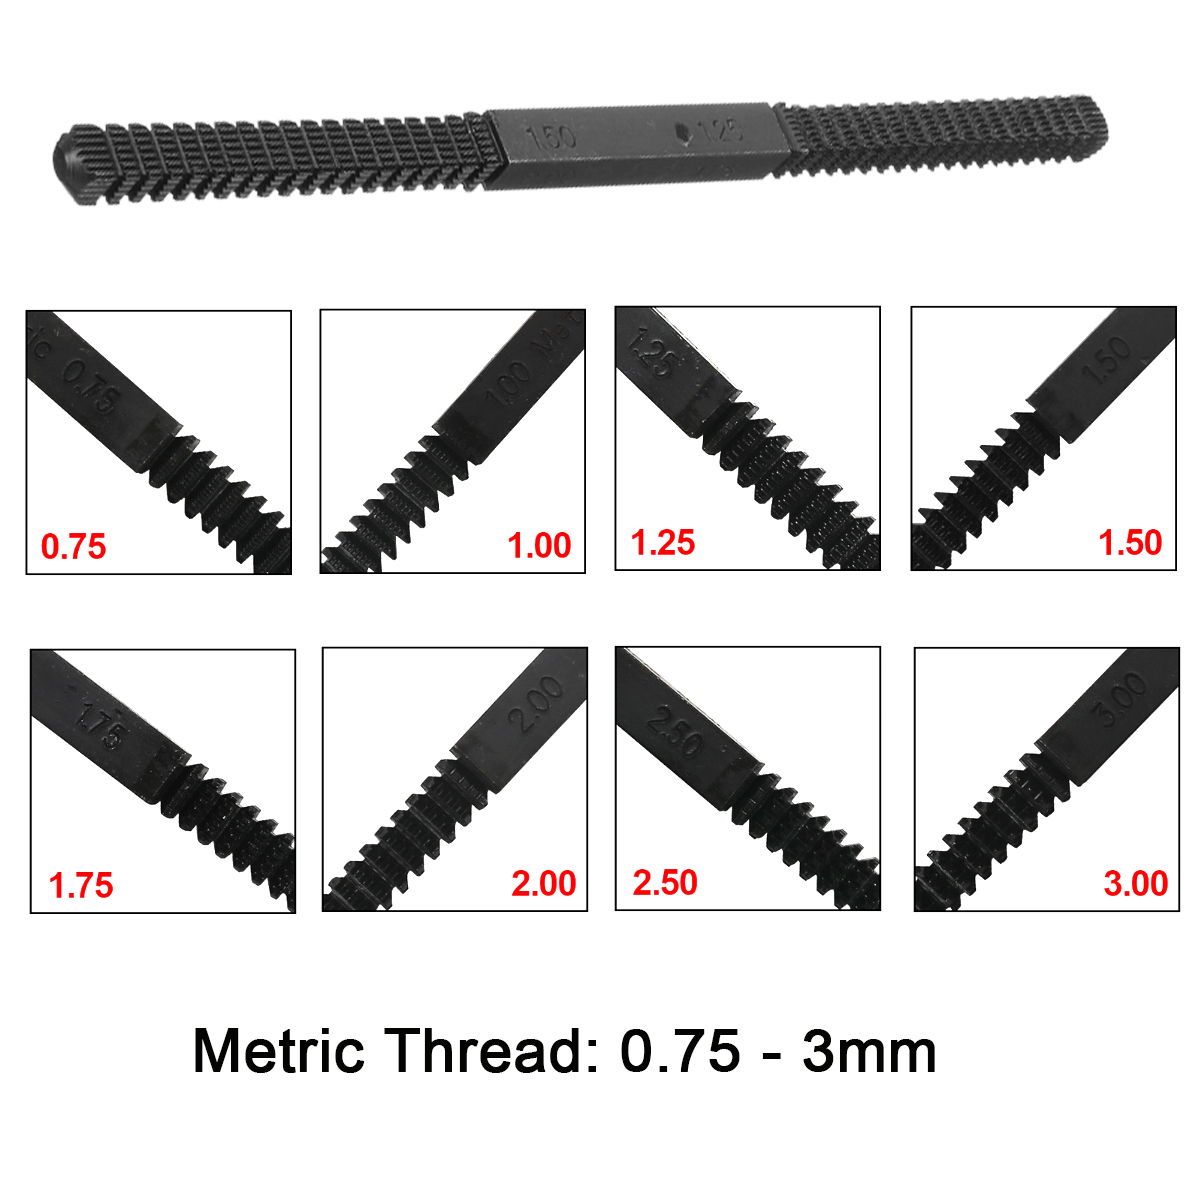 Metric-Thread-Repair-Tool-Restoration-File-Damaged-Threads-075-to-3mm-Pitch-1424557-3